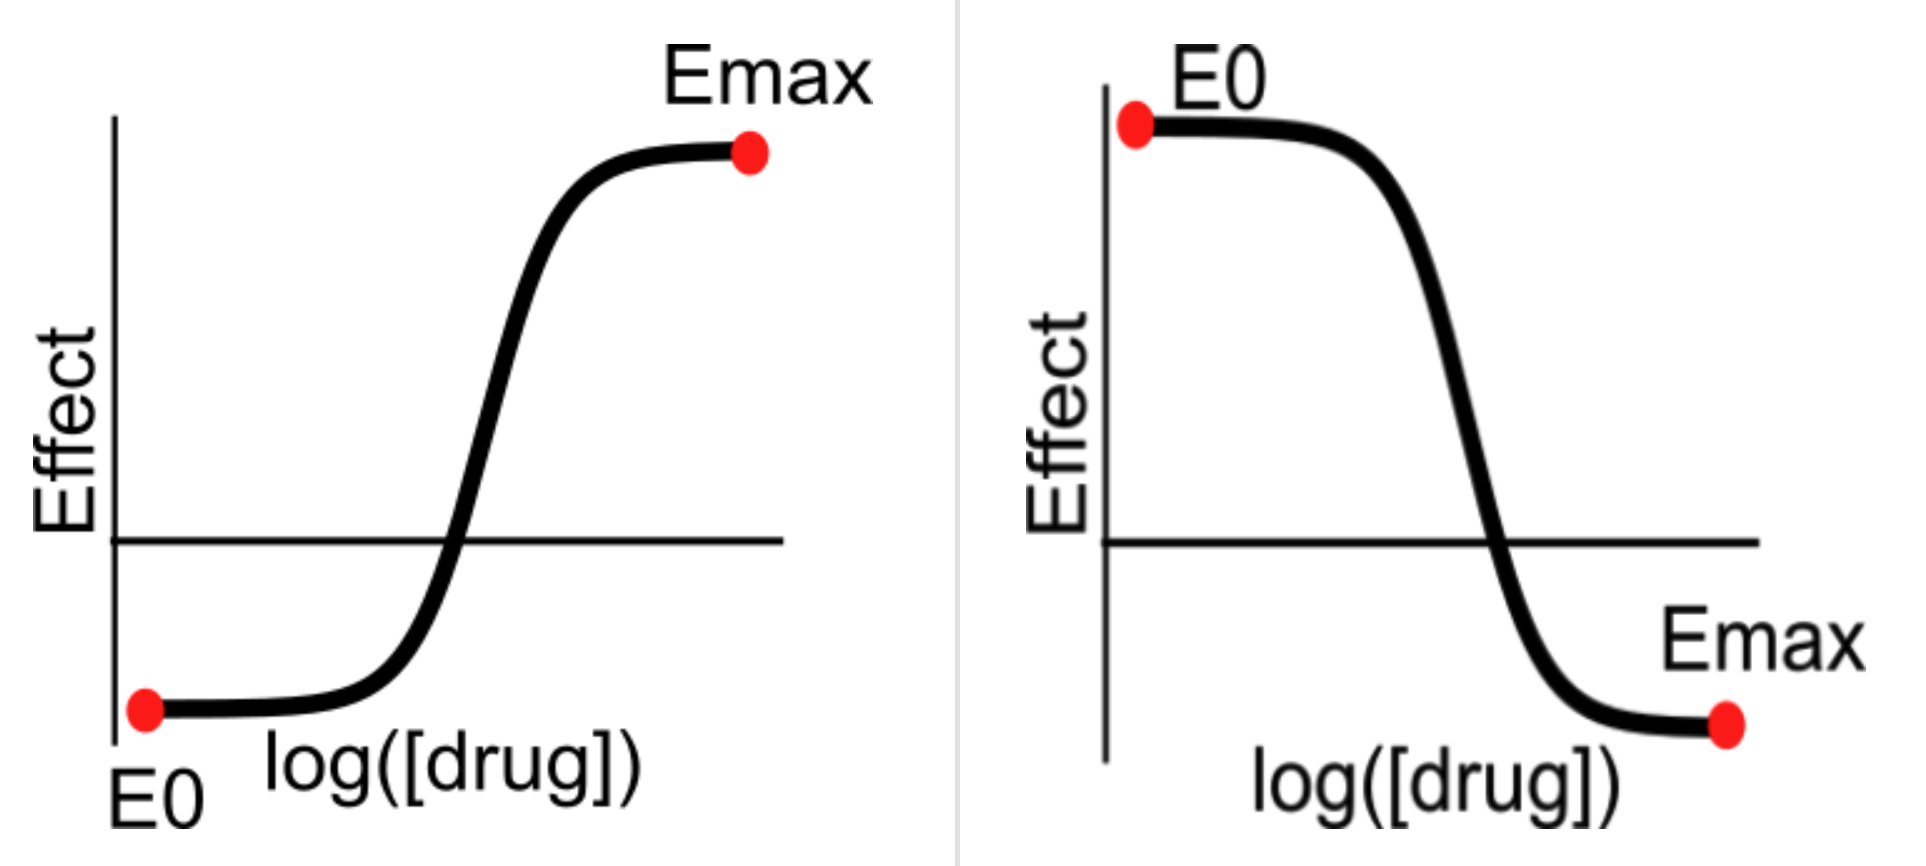 Dose-response curve illustrating Emax greater than and less than E0